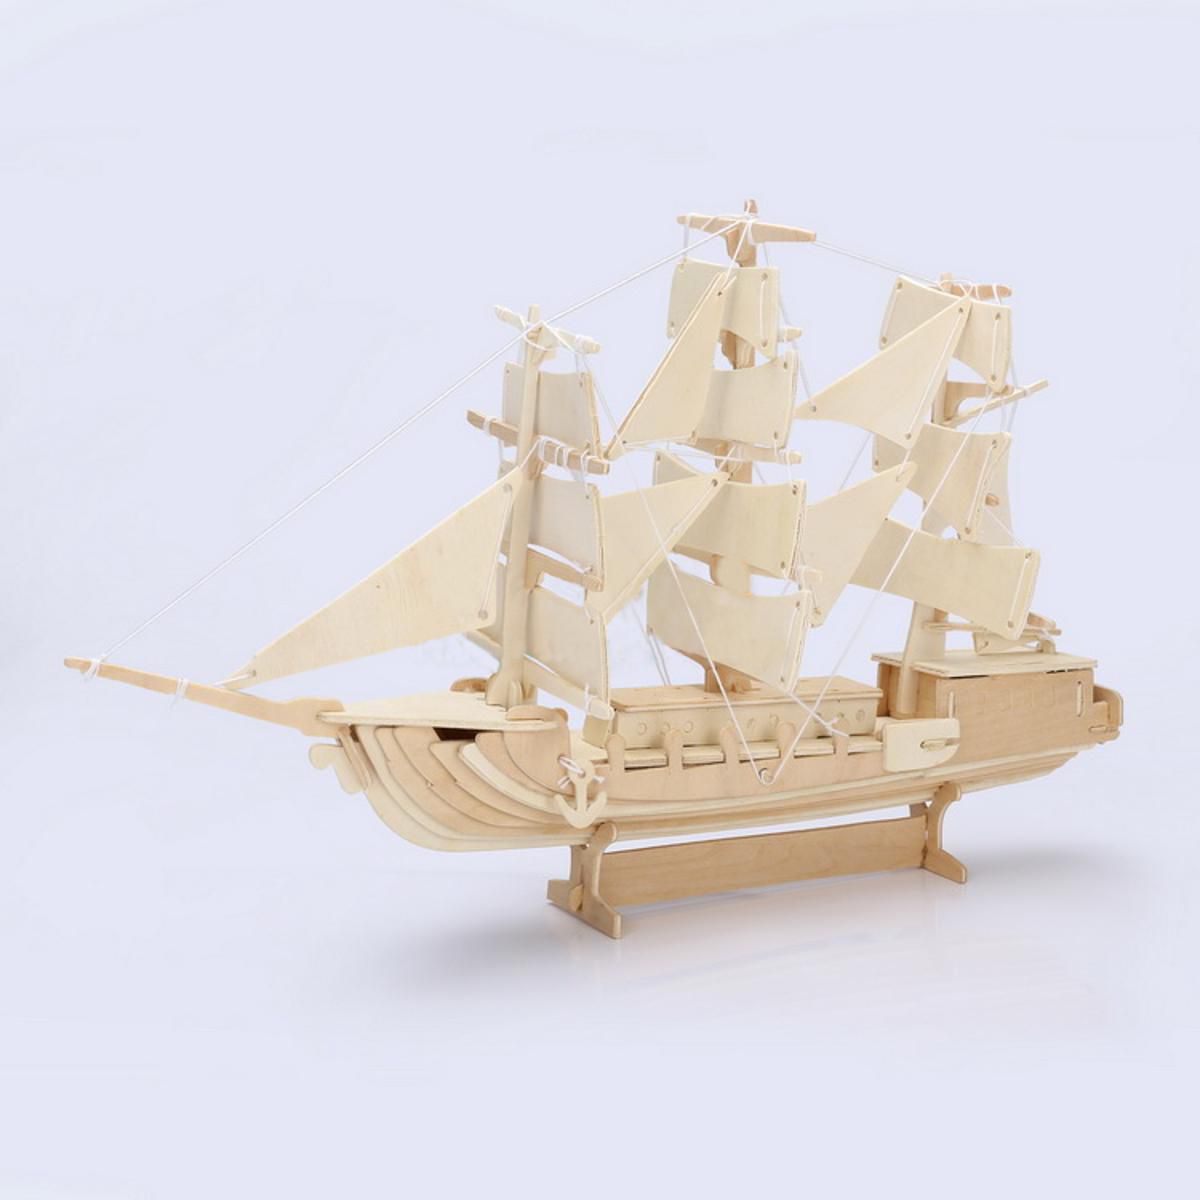 3D Puzzle Toy Kid Gift Sailing Ship Woodcraft Construction Kit Wooden Boat Model 